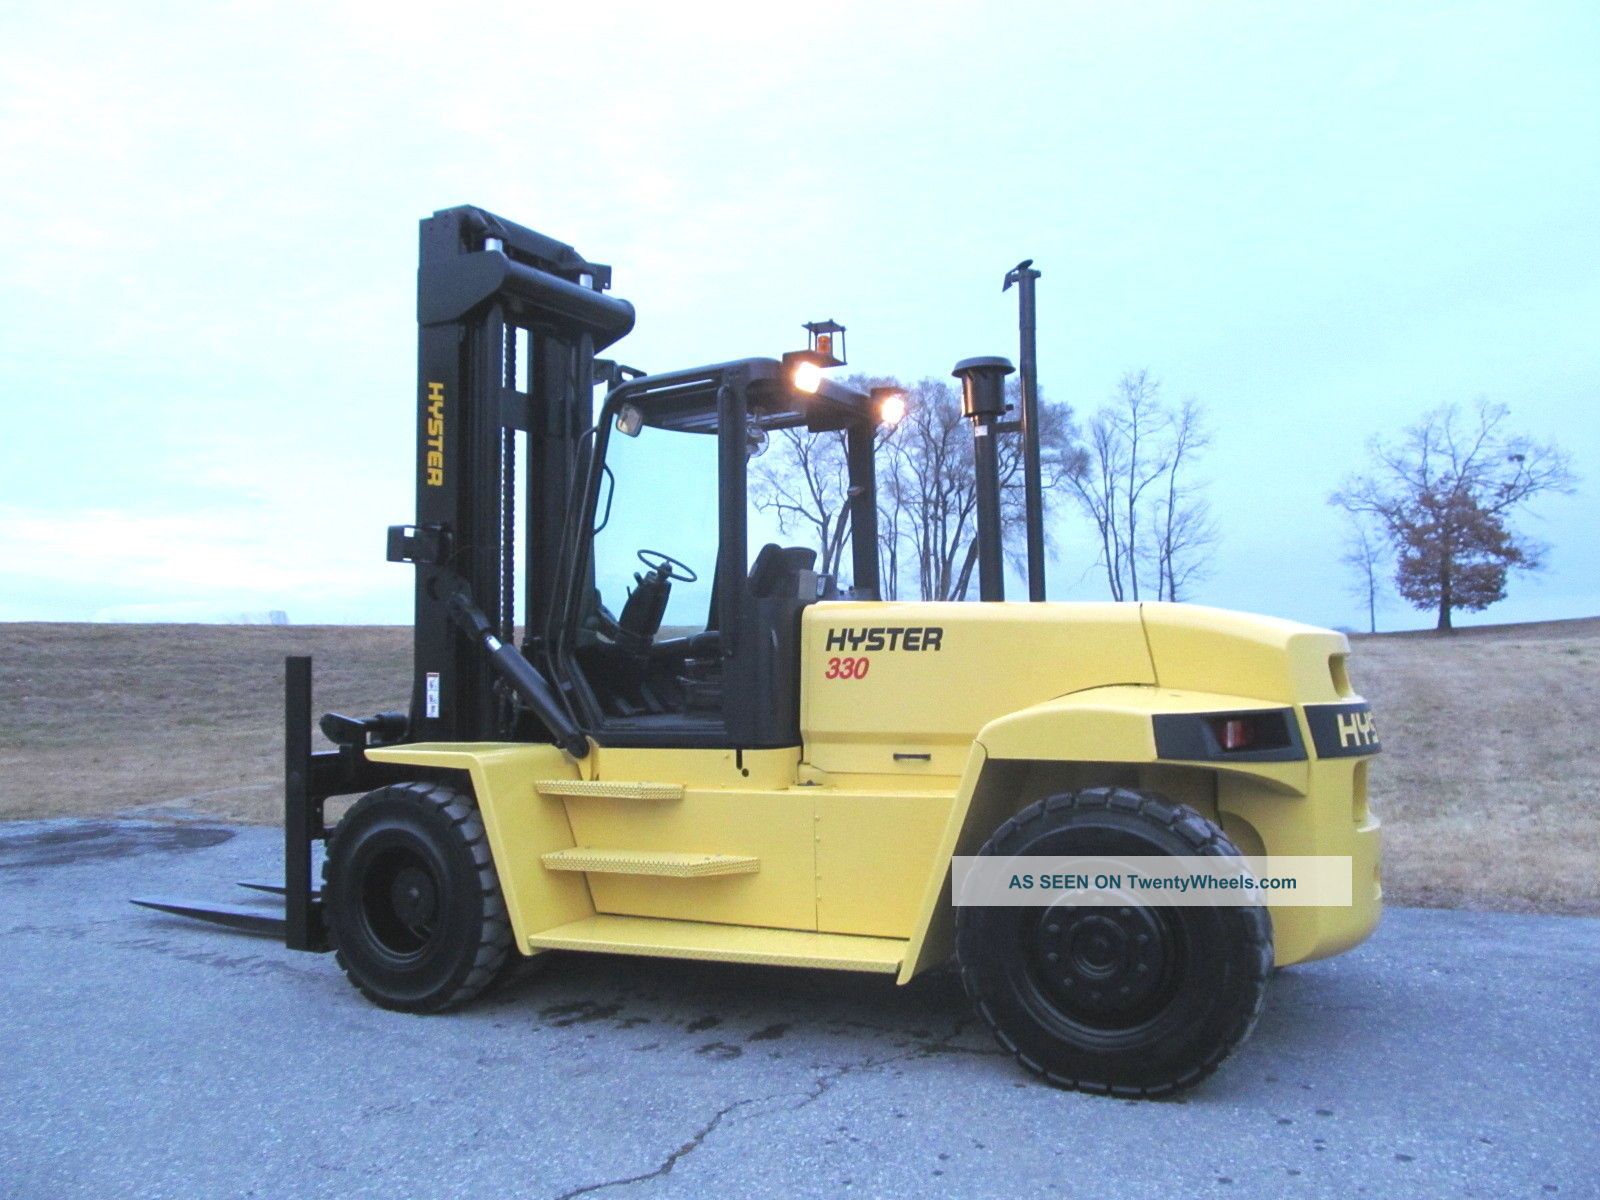 Hyster H330hd 33 000 Diesel Pneumatic Tire Forklift Sideshift And Fork